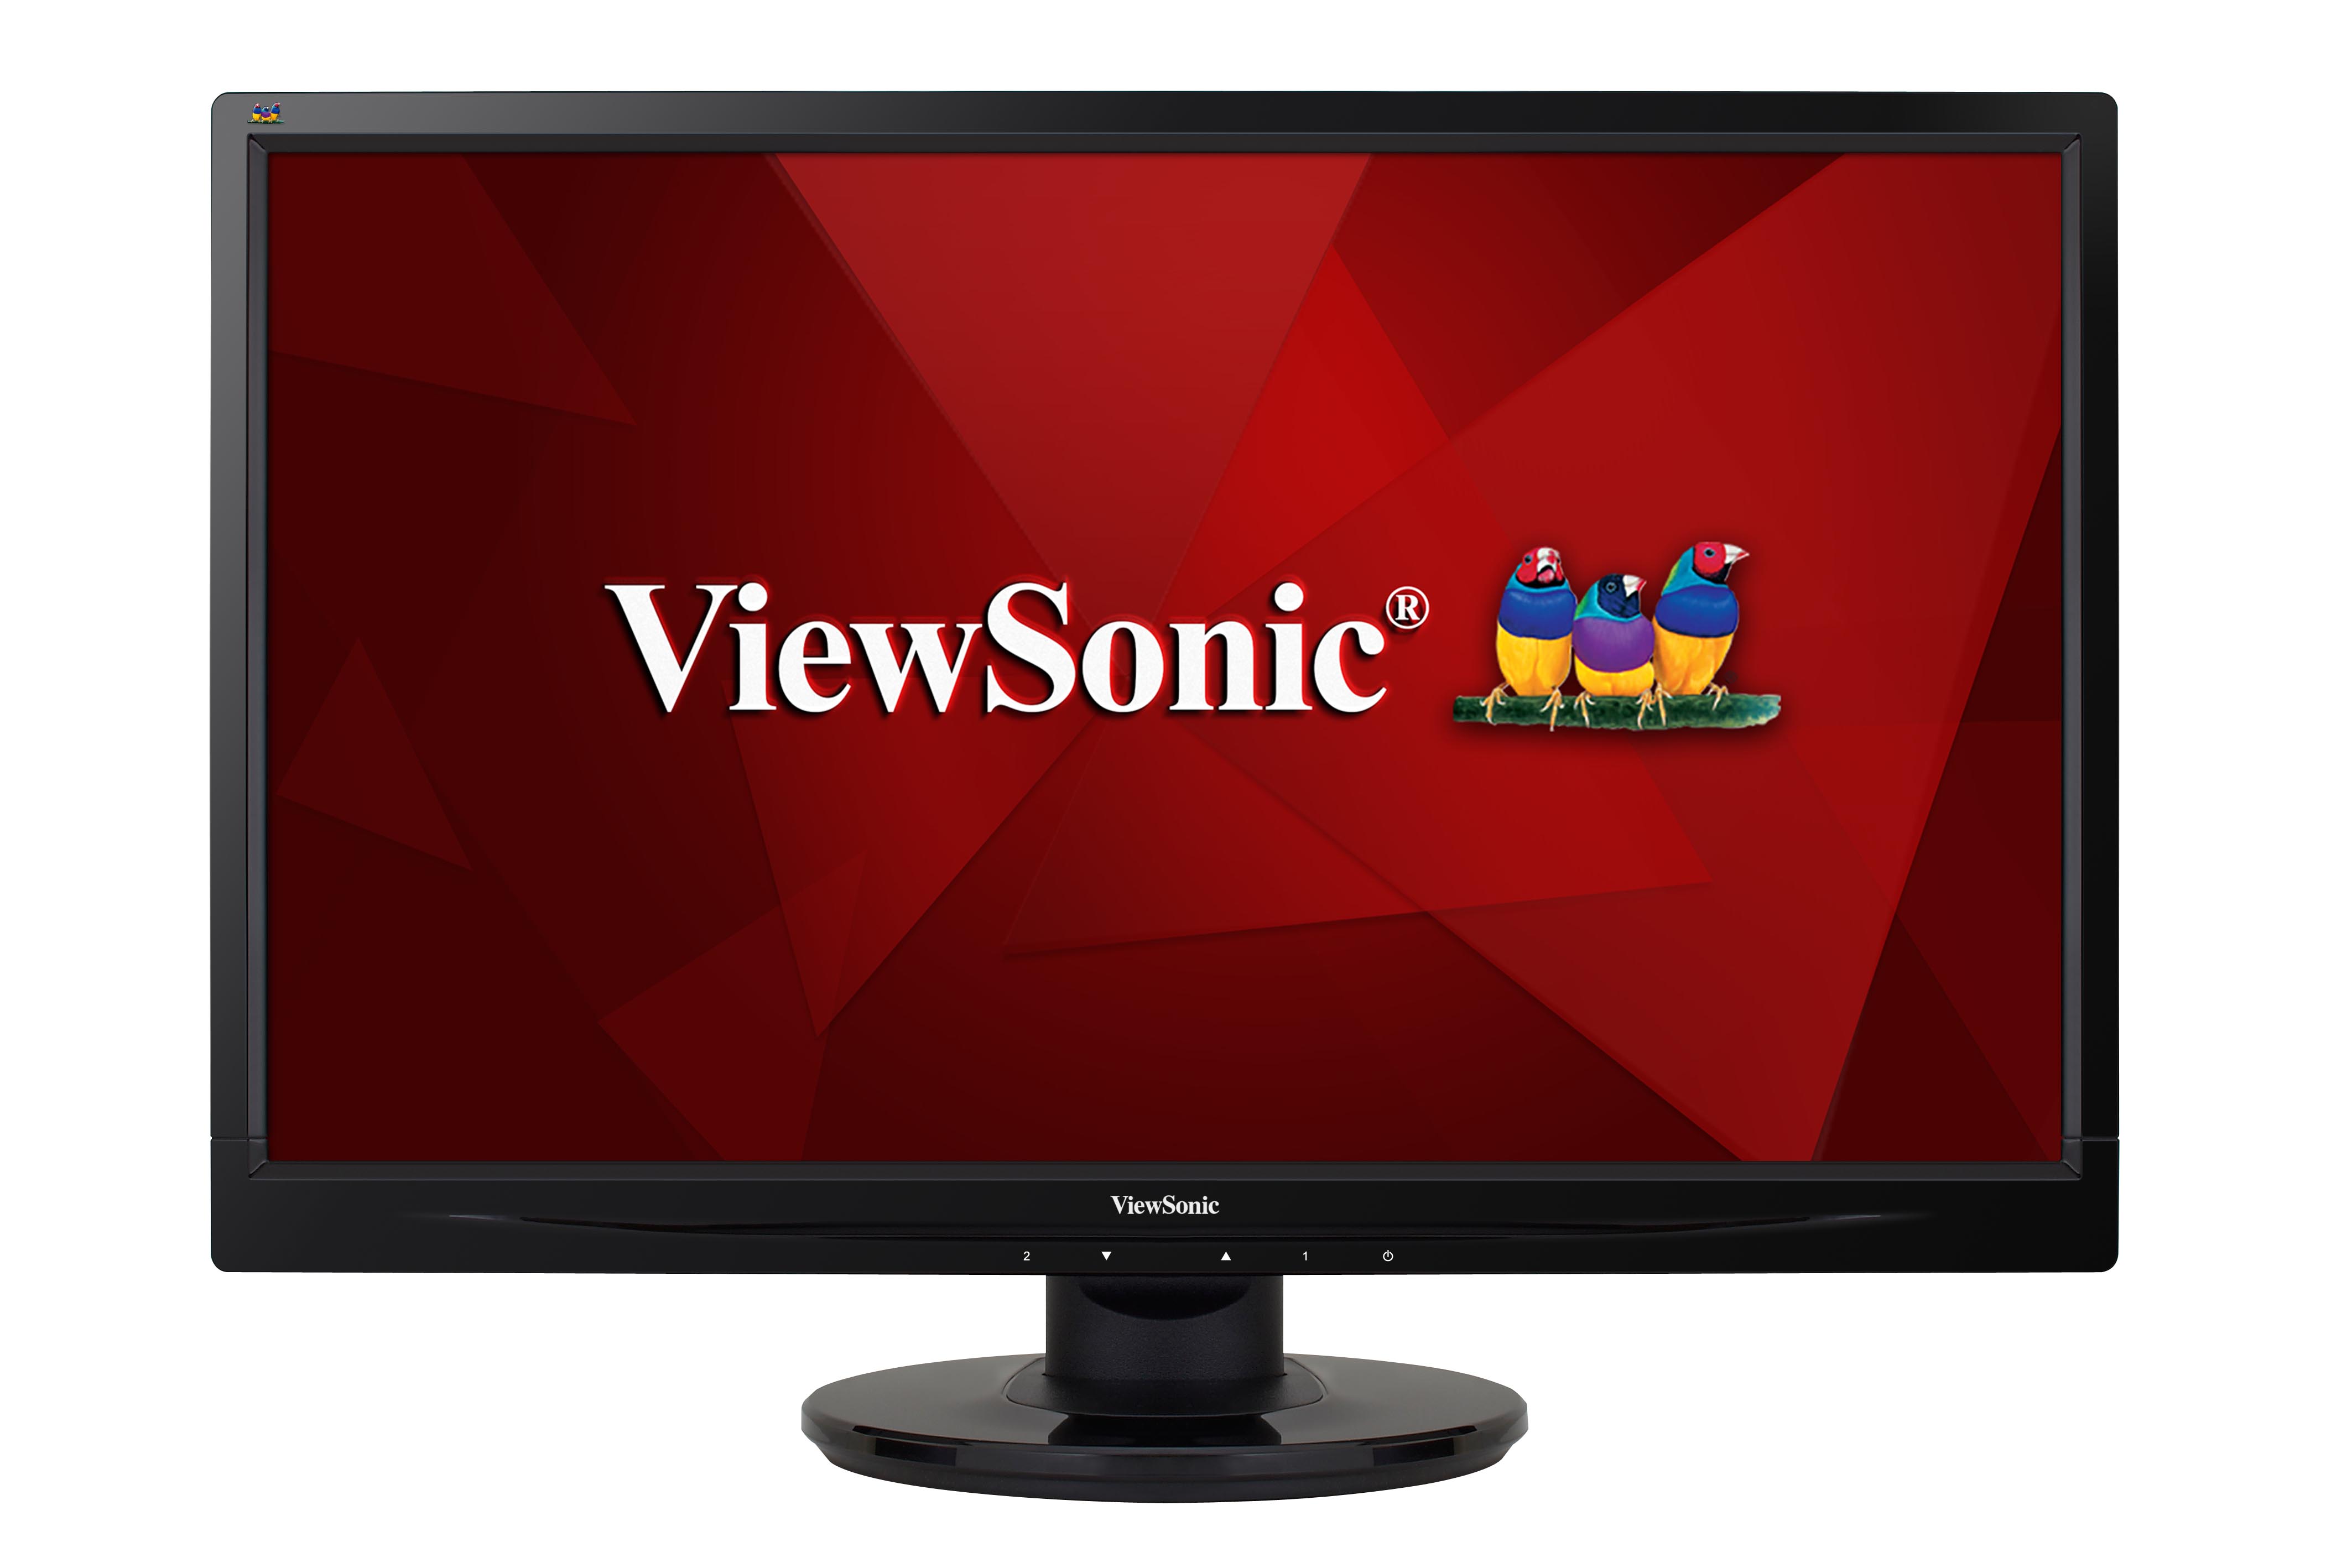 viewsonic drivers for linux